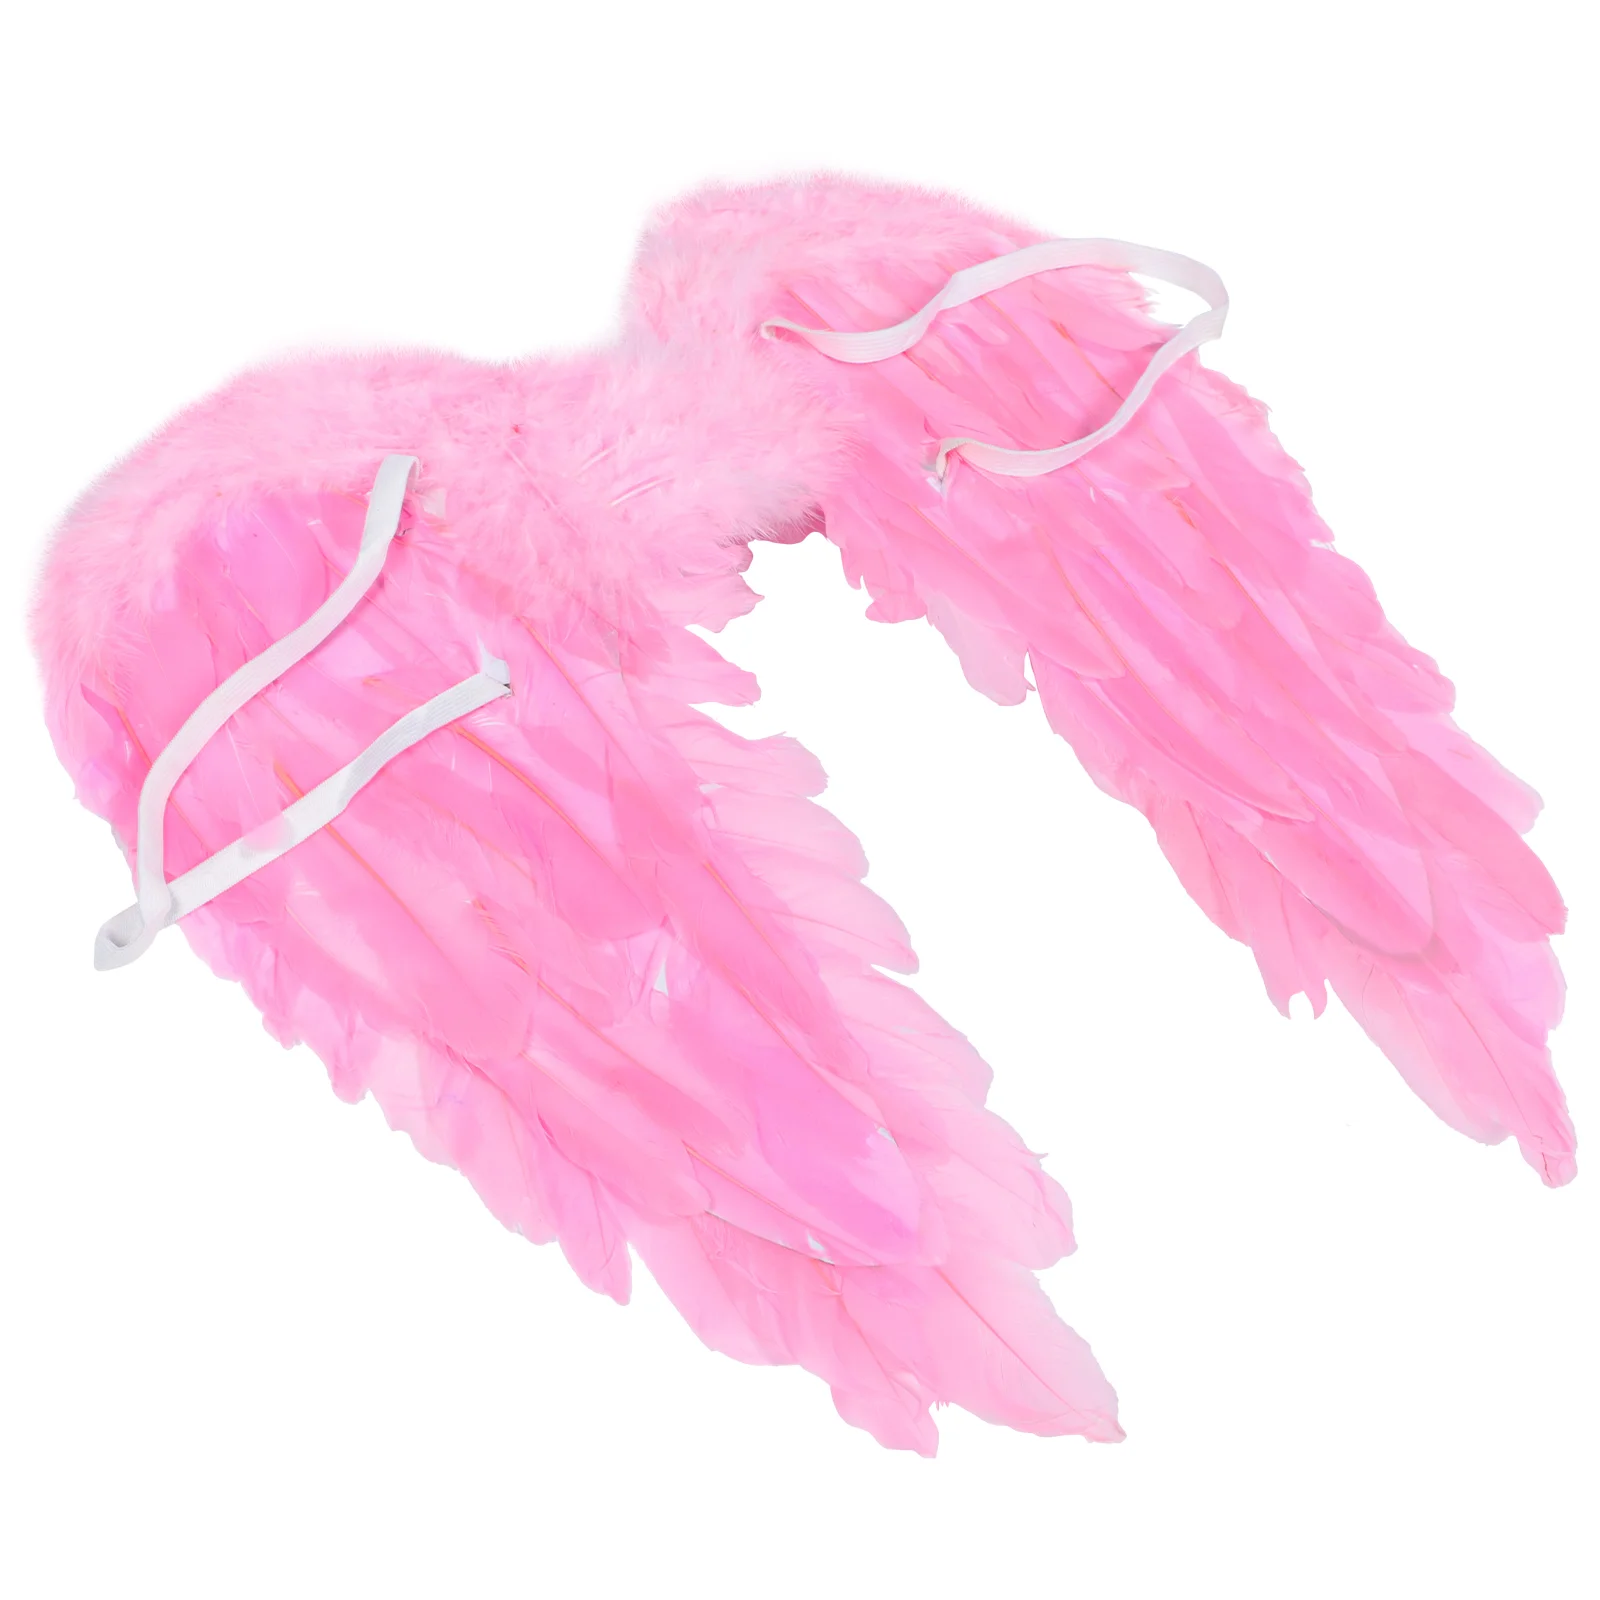 

Angel Wings Wing-shaped Adornment Plume Prop Exquisite Cosplay Outfits Lovely Decorate Ornament